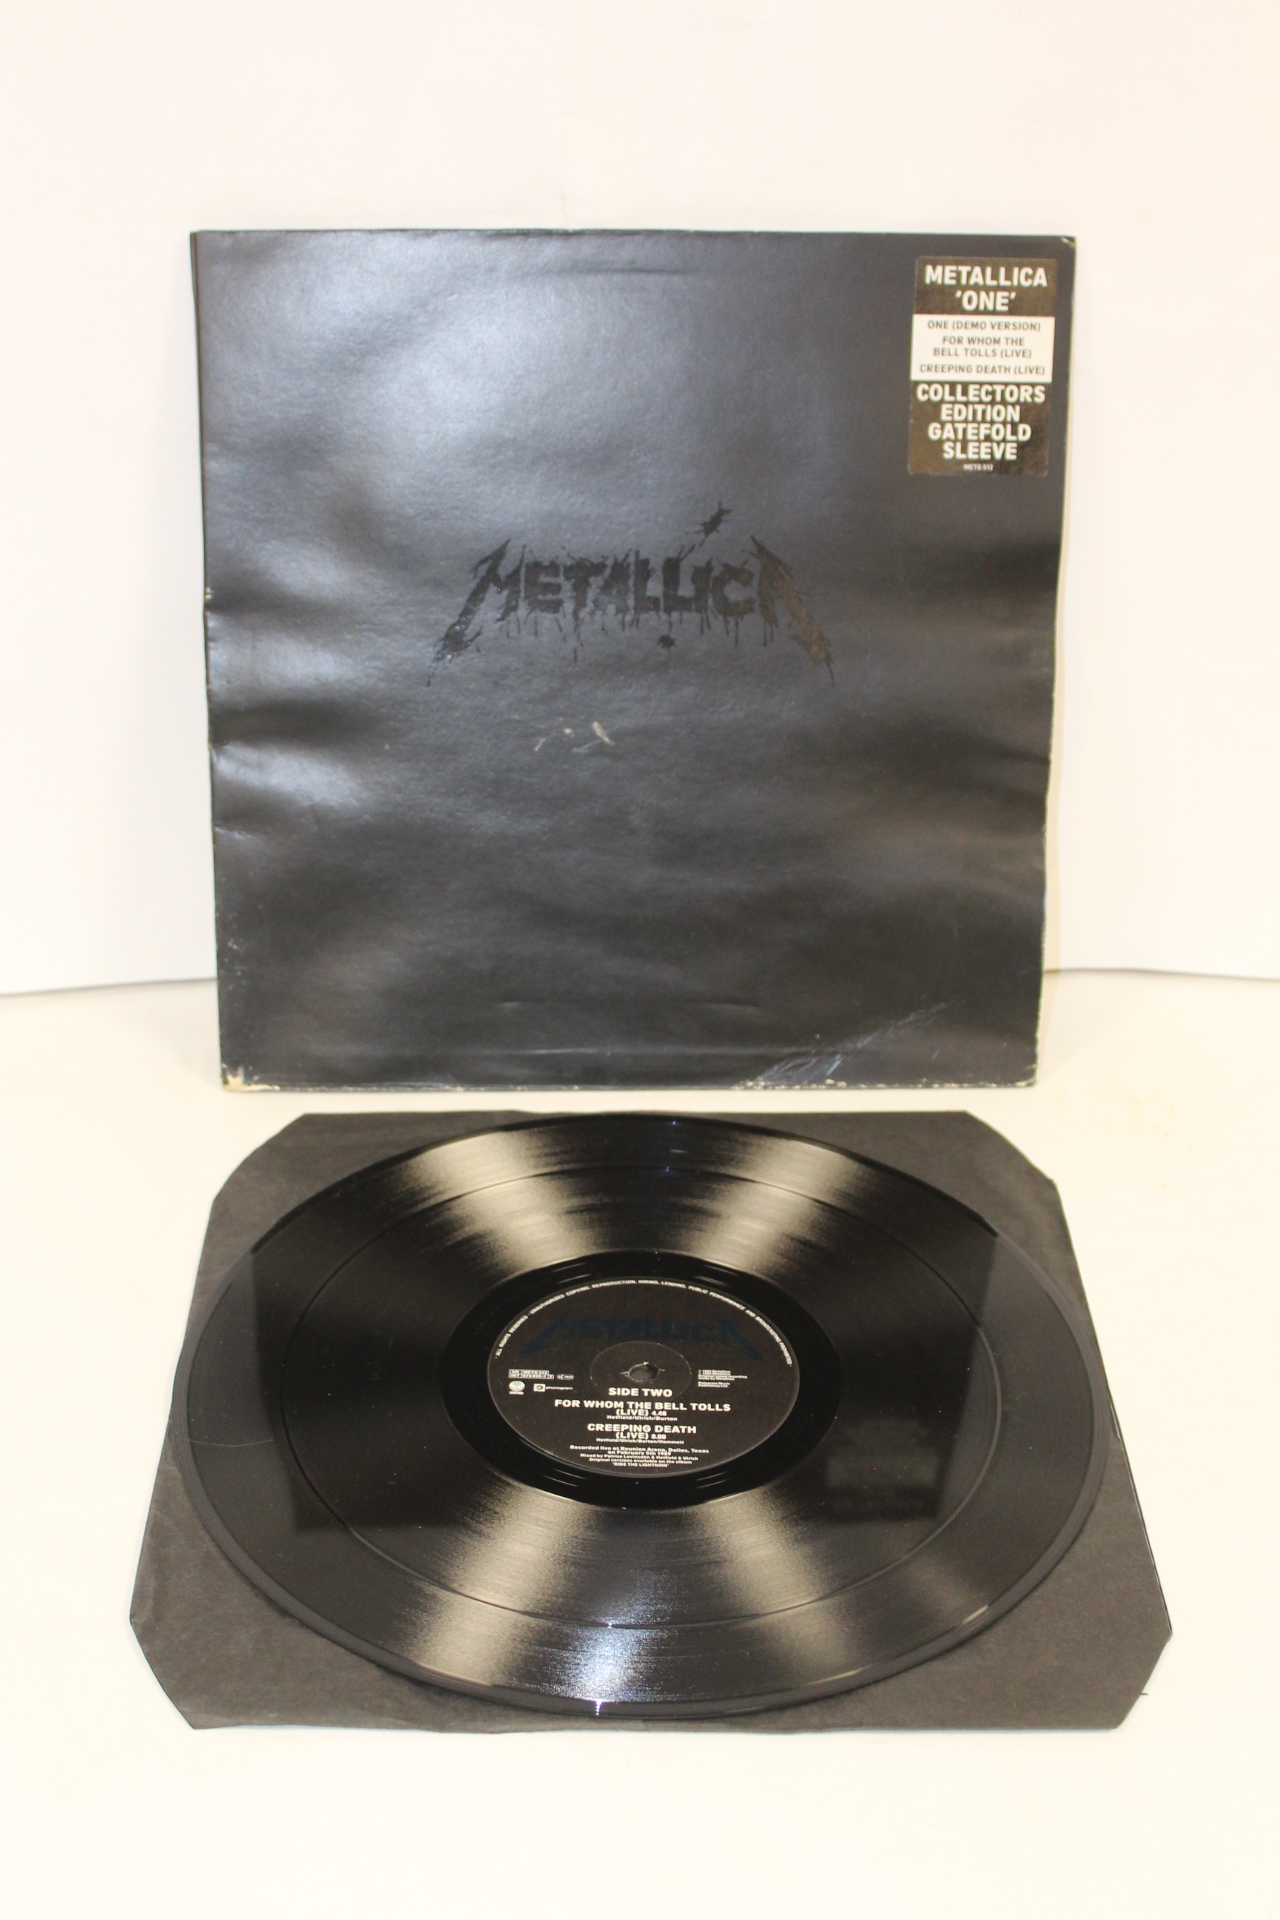 NWOBHM 12" singles and LPs to include Def Leppard, 2 x Kick Axe and Metallica 'One' in gatefold - Image 7 of 7